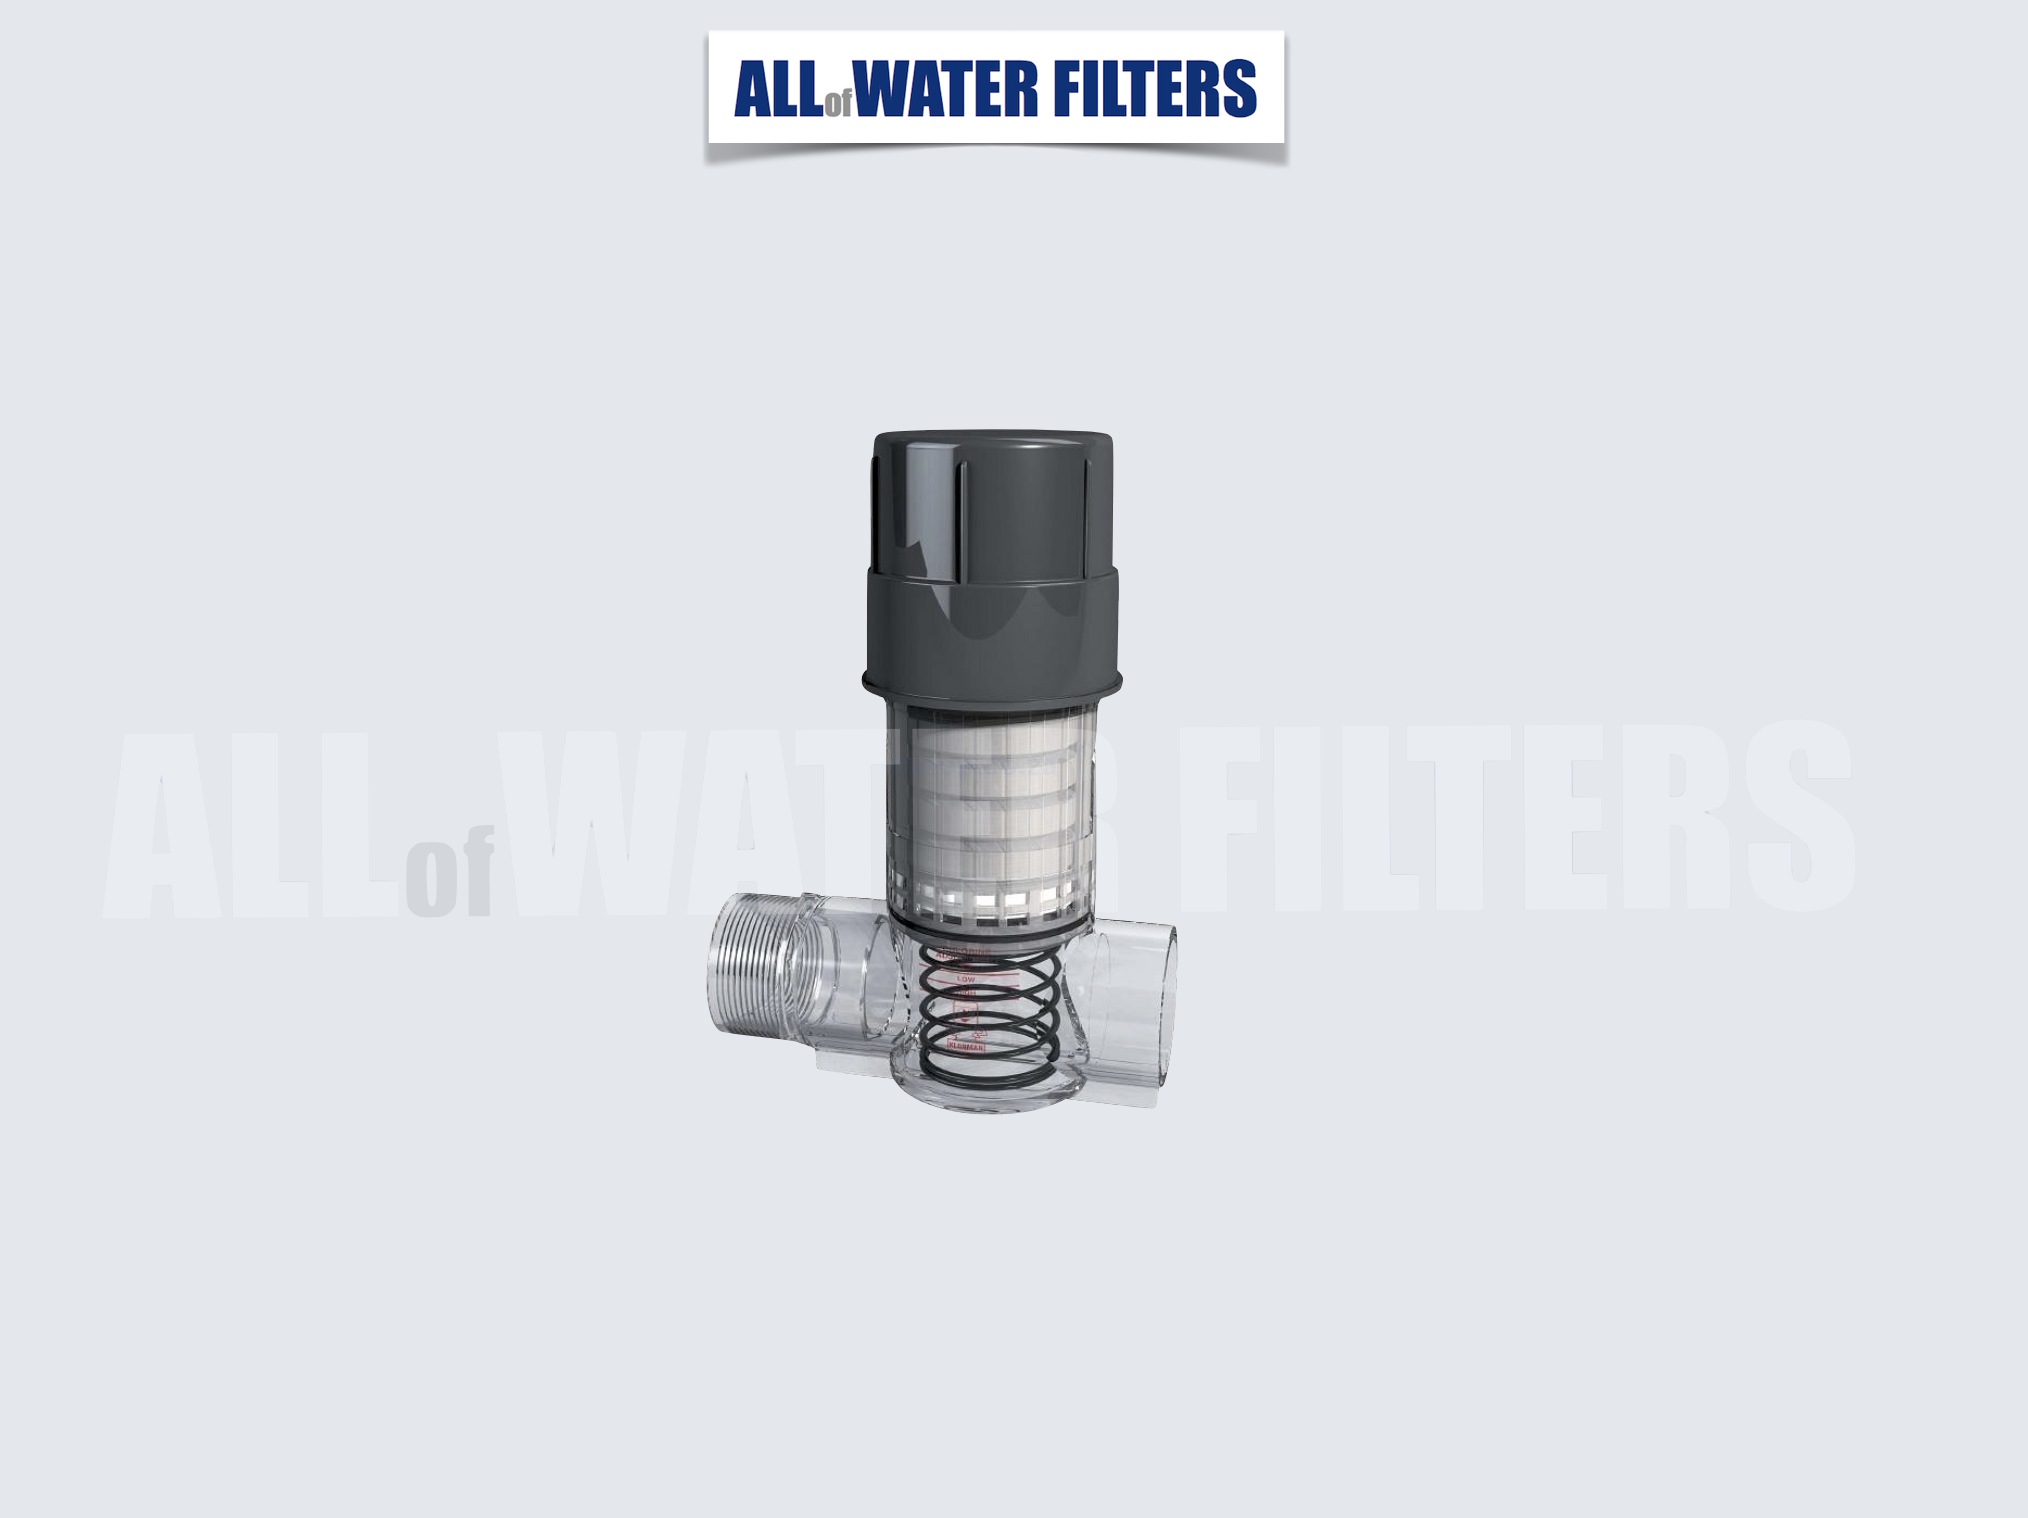 chlorinator-inline-chlorinator-with-or-without-chlorine-cartridges